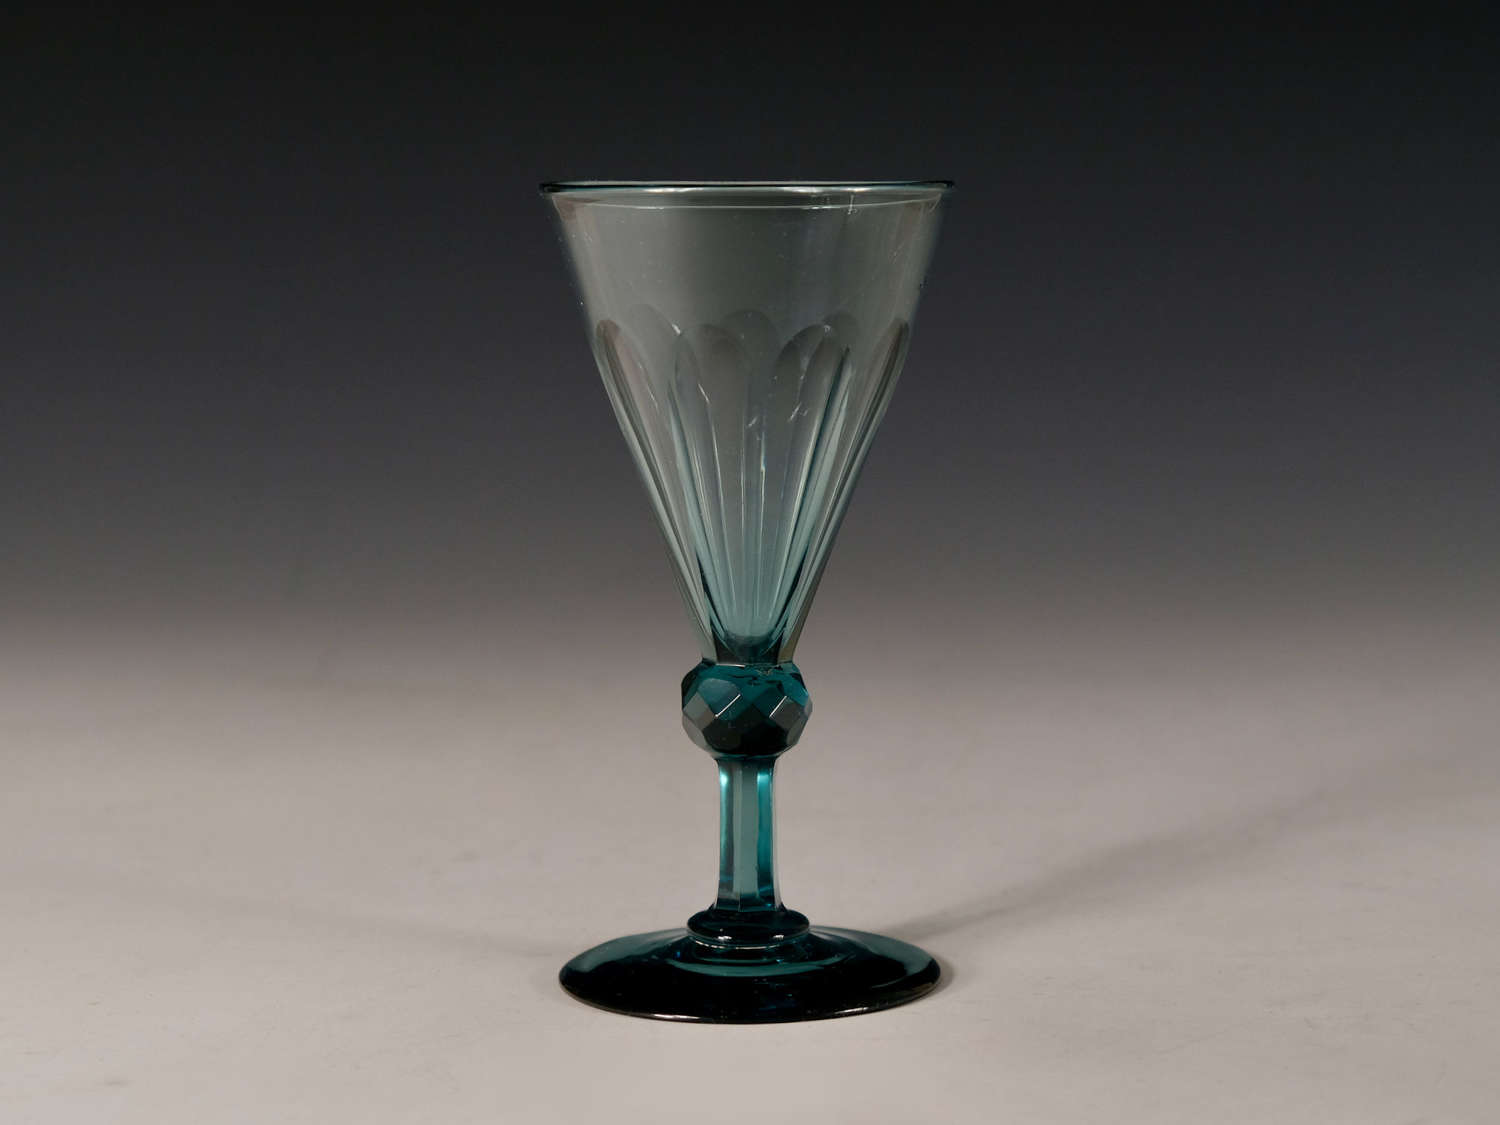 Antique wine glass teal English c1830